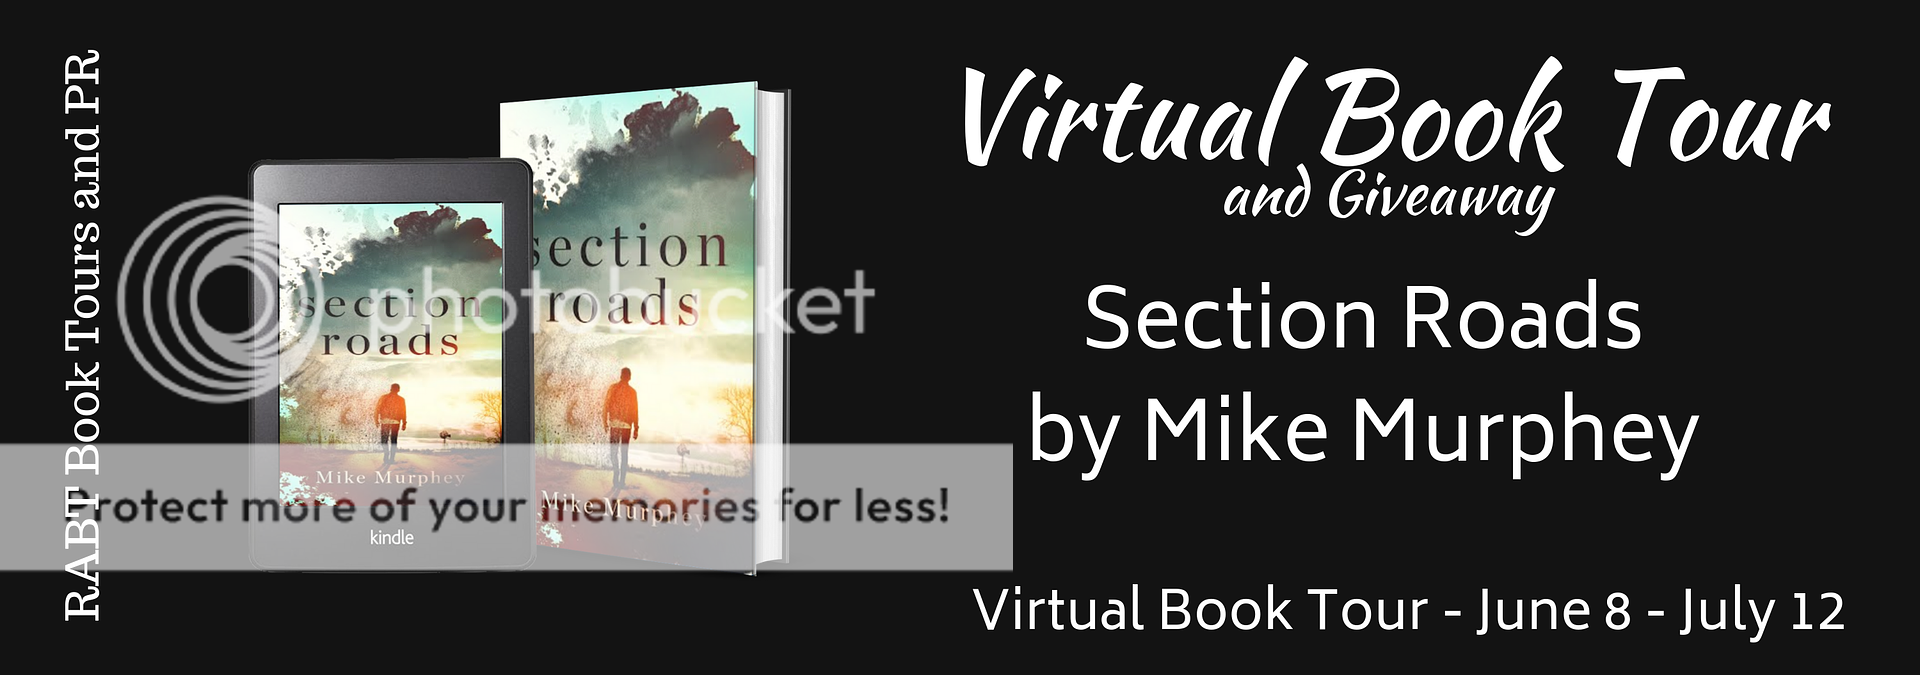 Virtual Book Tour: Section Roads by Mike Murphey #mystery #humor #interview #giveaway @RABTBookTours